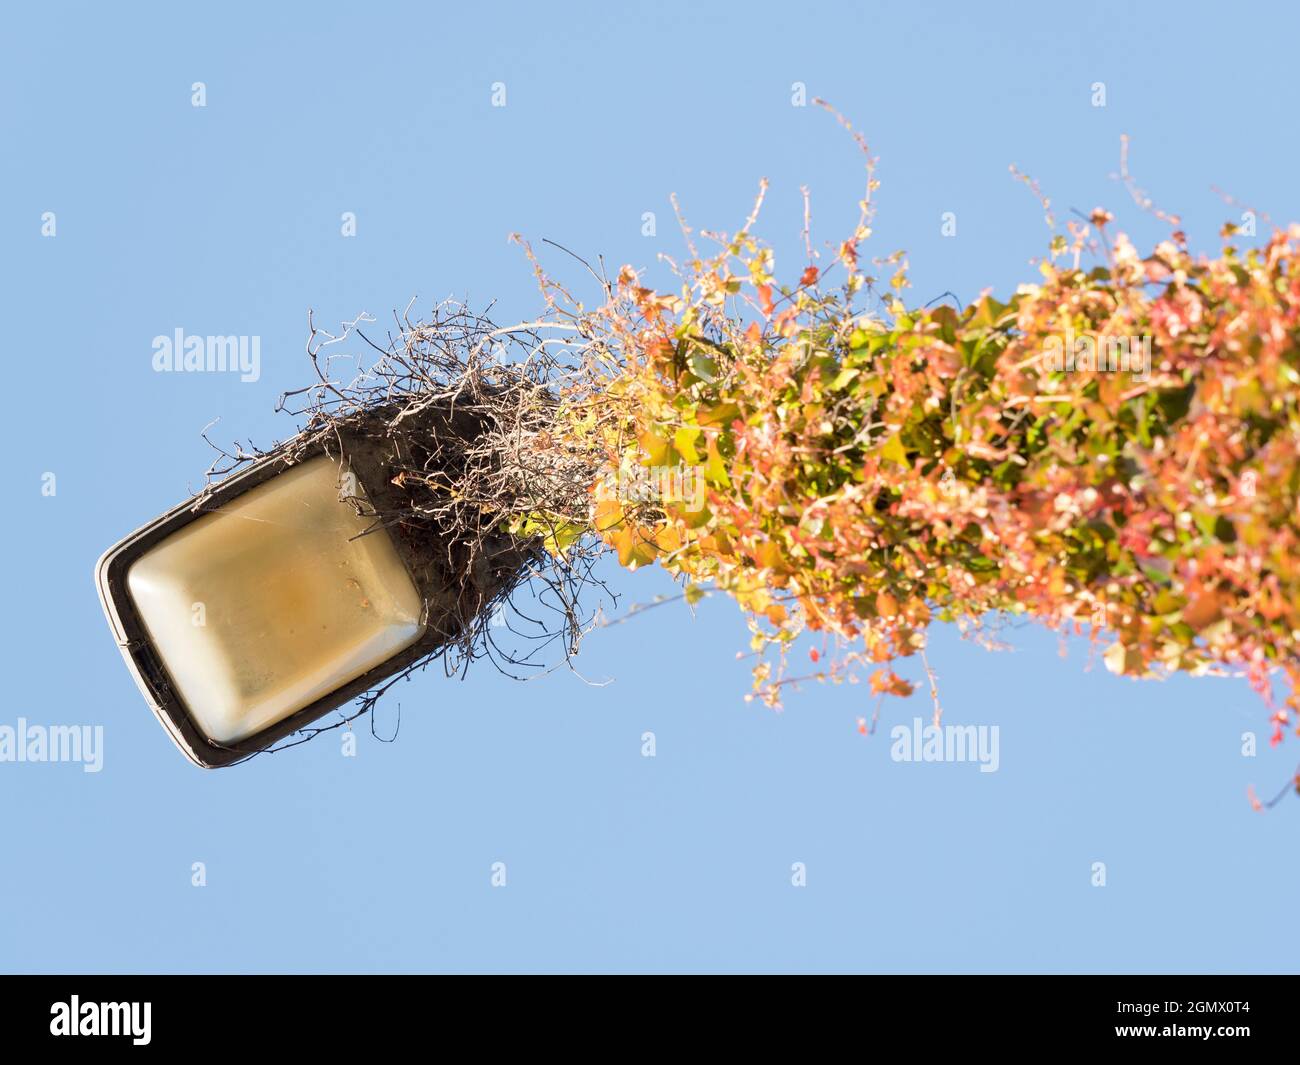 Oxford, England - 2015; No, not some art installation. This is a street lamp in central Oxford that has overgrown with creeping Ivy. Autumn transforms Stock Photo